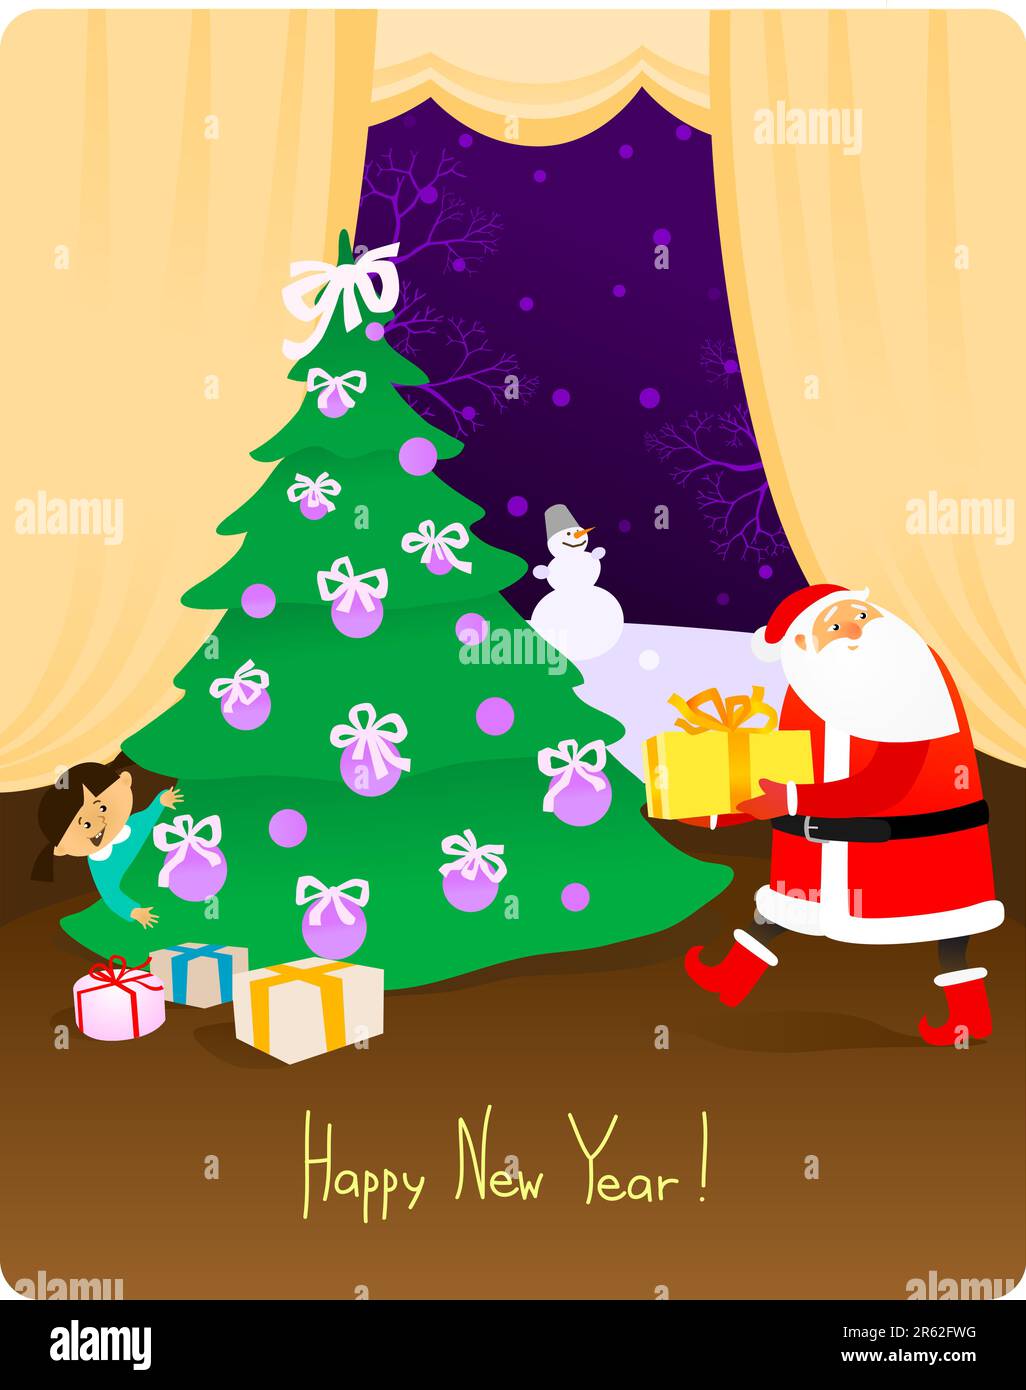 Sneaking Santa gonna leave a present near the new year tree, and a child is spying upon him. Greeting phrase is a separated layer, so you can write... Stock Vector